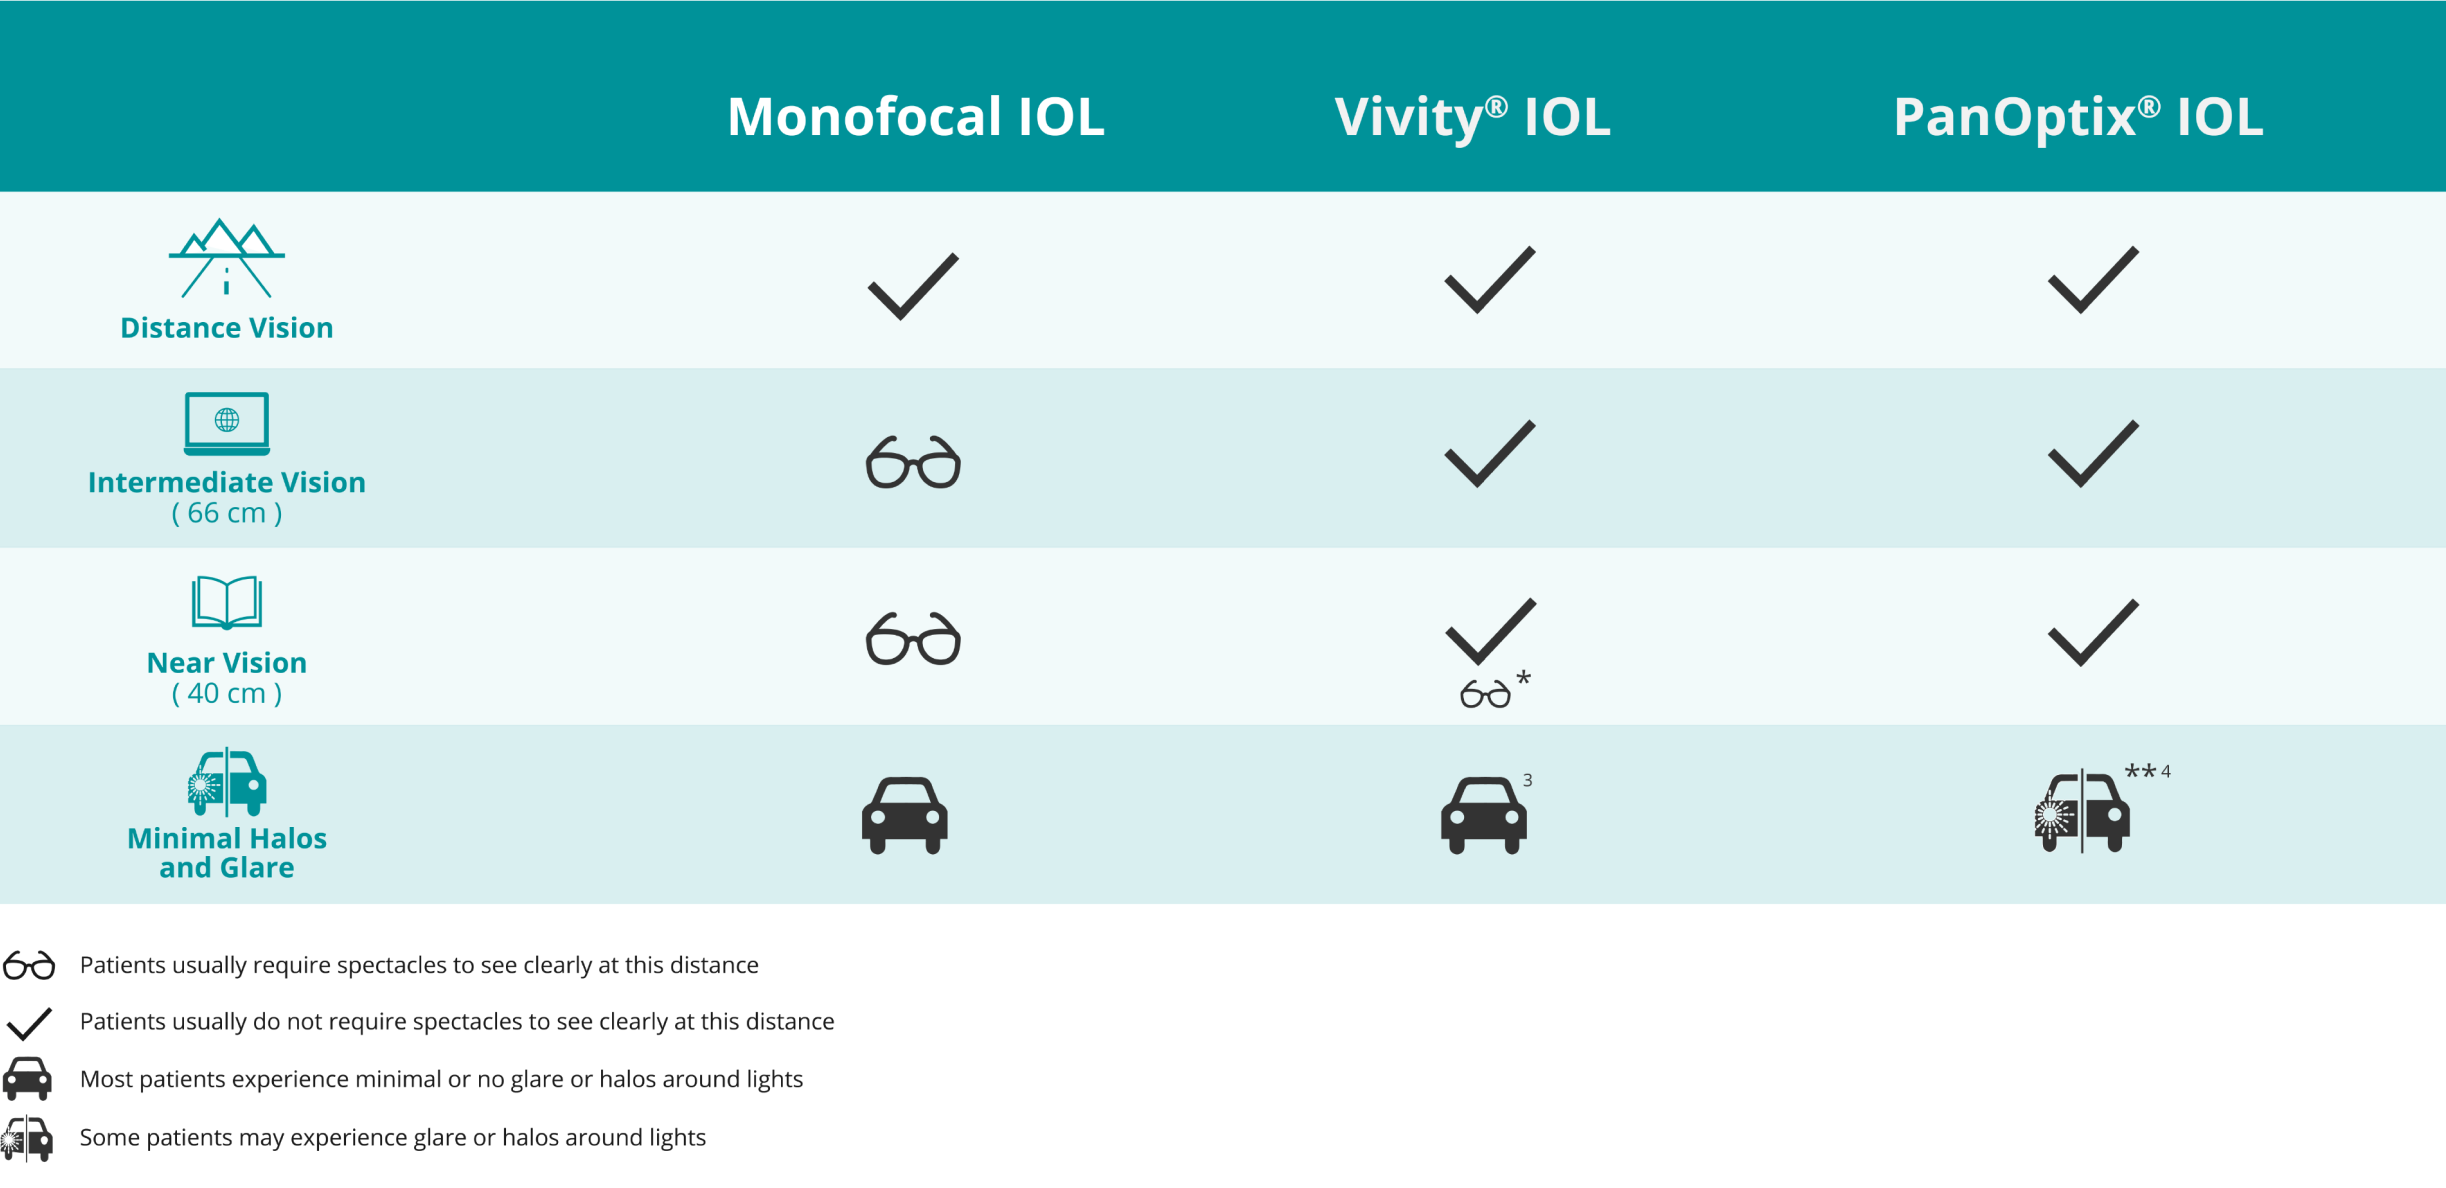 Table that compares the different benefits that the Monofocal Lens, Acrysof IQ Vivity® IOL, and Acrysof® IQ  PanOptix® IOL provides for an individual’s vision at different distances and under different conditions.